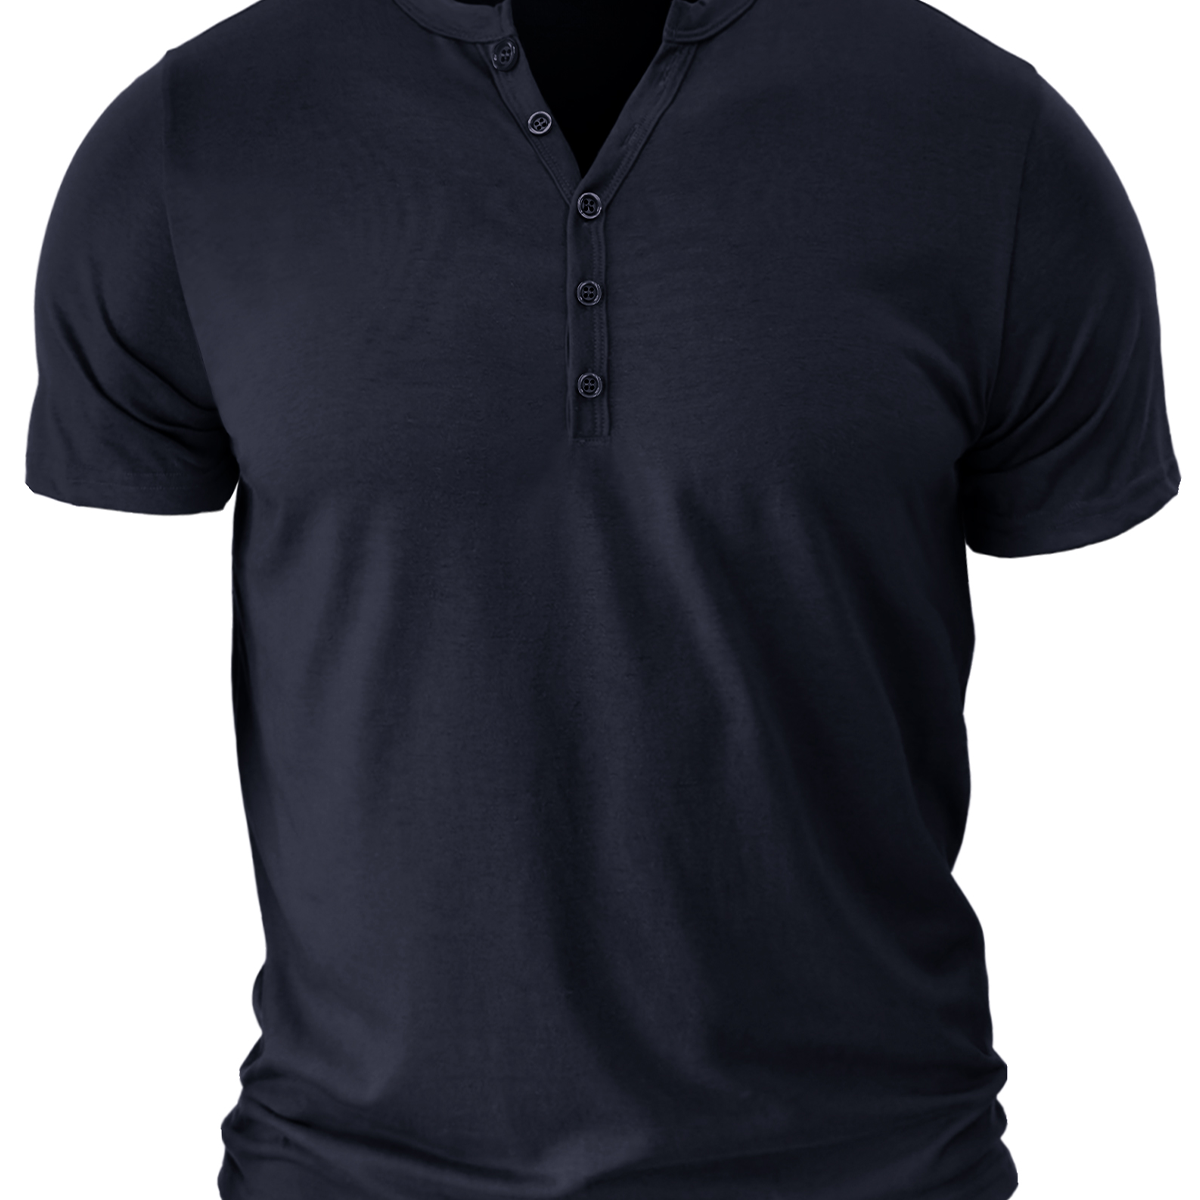 Men's Casual Cotton V Neck Solid Color Breathable Short Sleeve T-Shirt